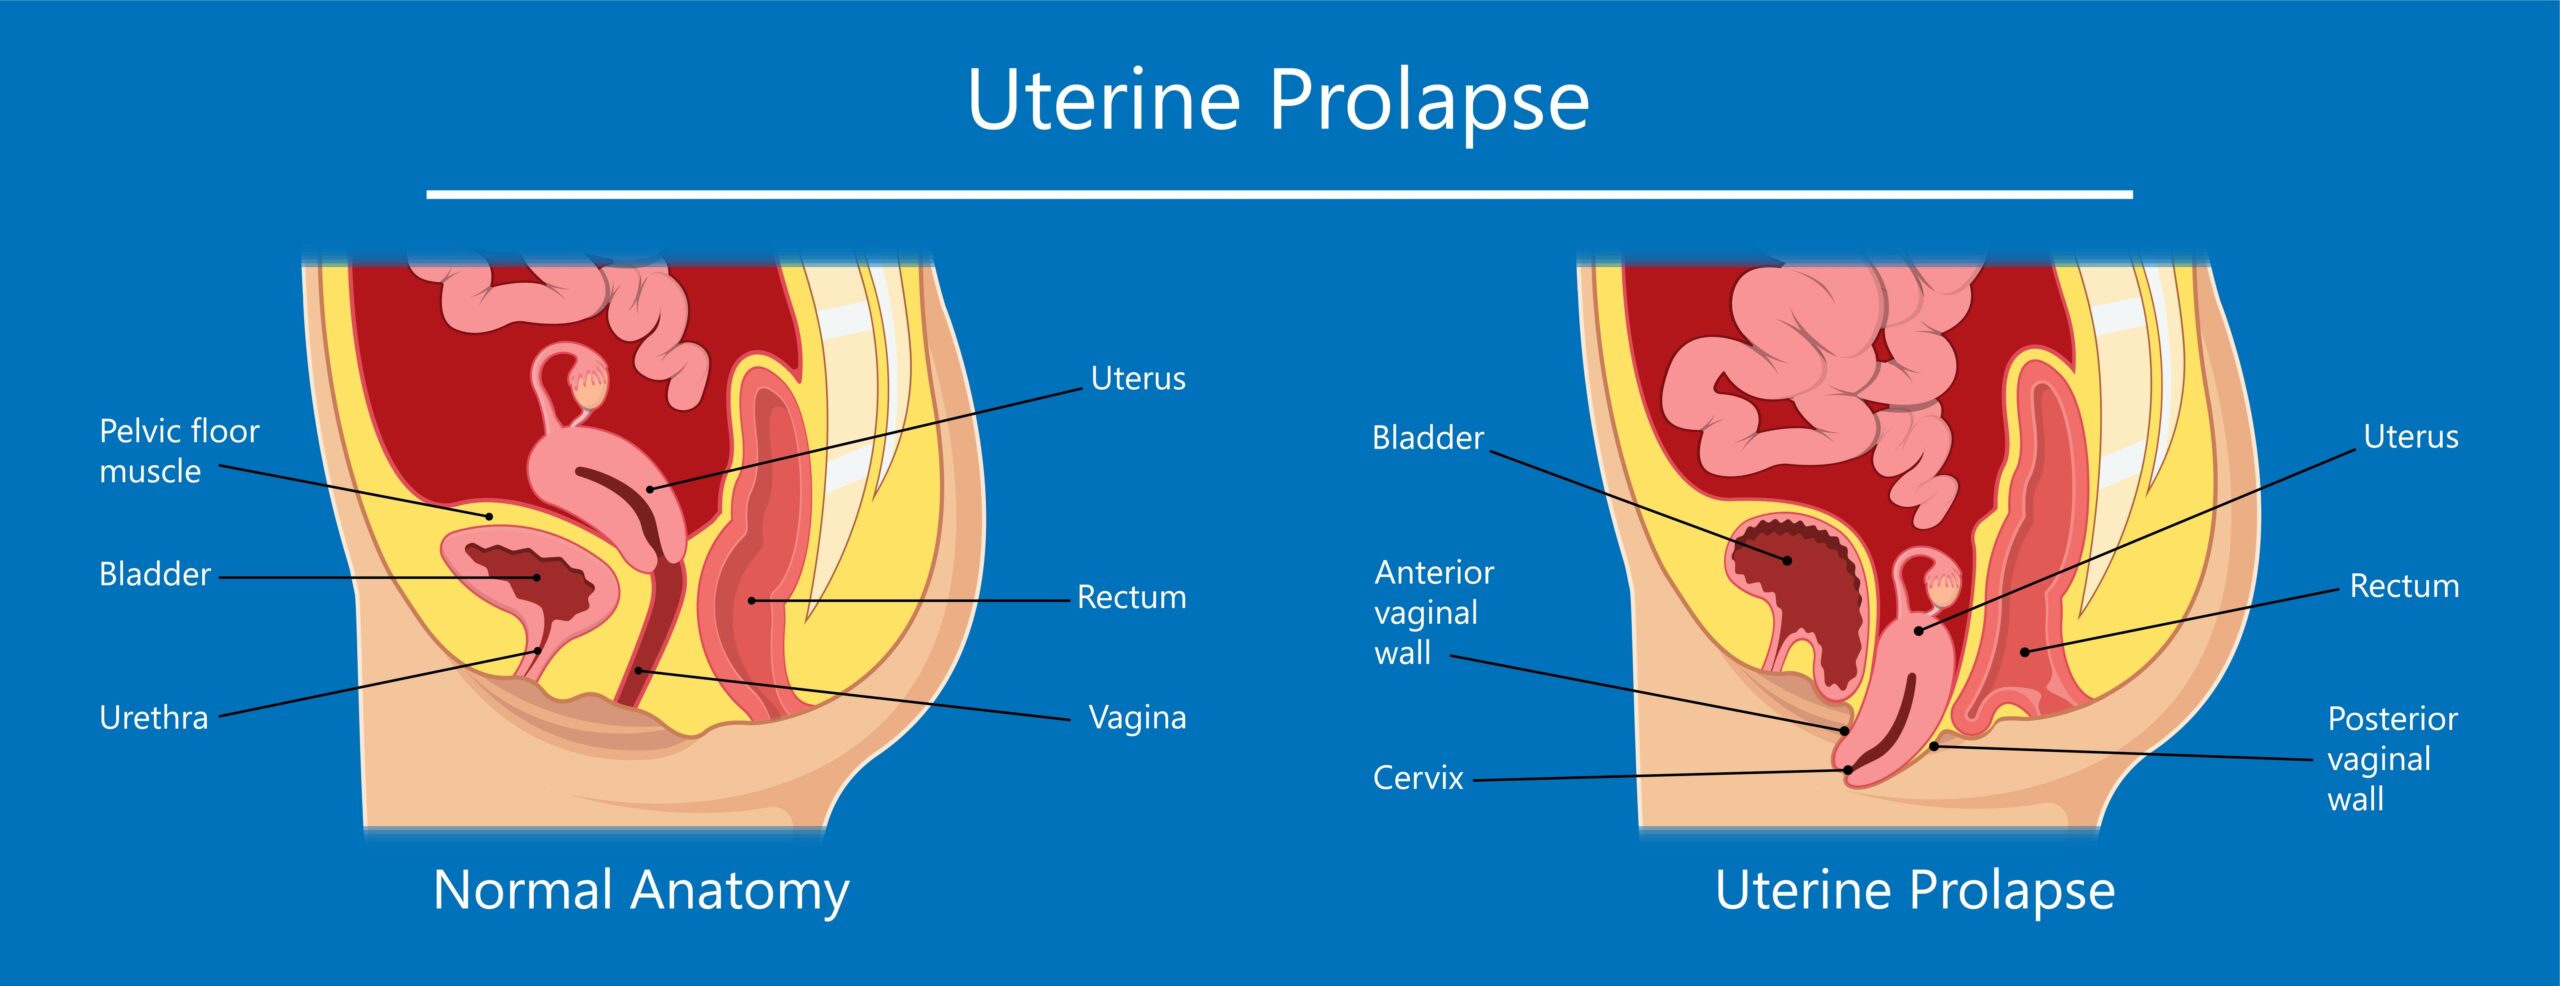 Pelvic organ prolapse (POP) is a condition that occurs when one or more pelvic organs, such as the uterus, bladder, or rectum, descend or shift from their normal positions